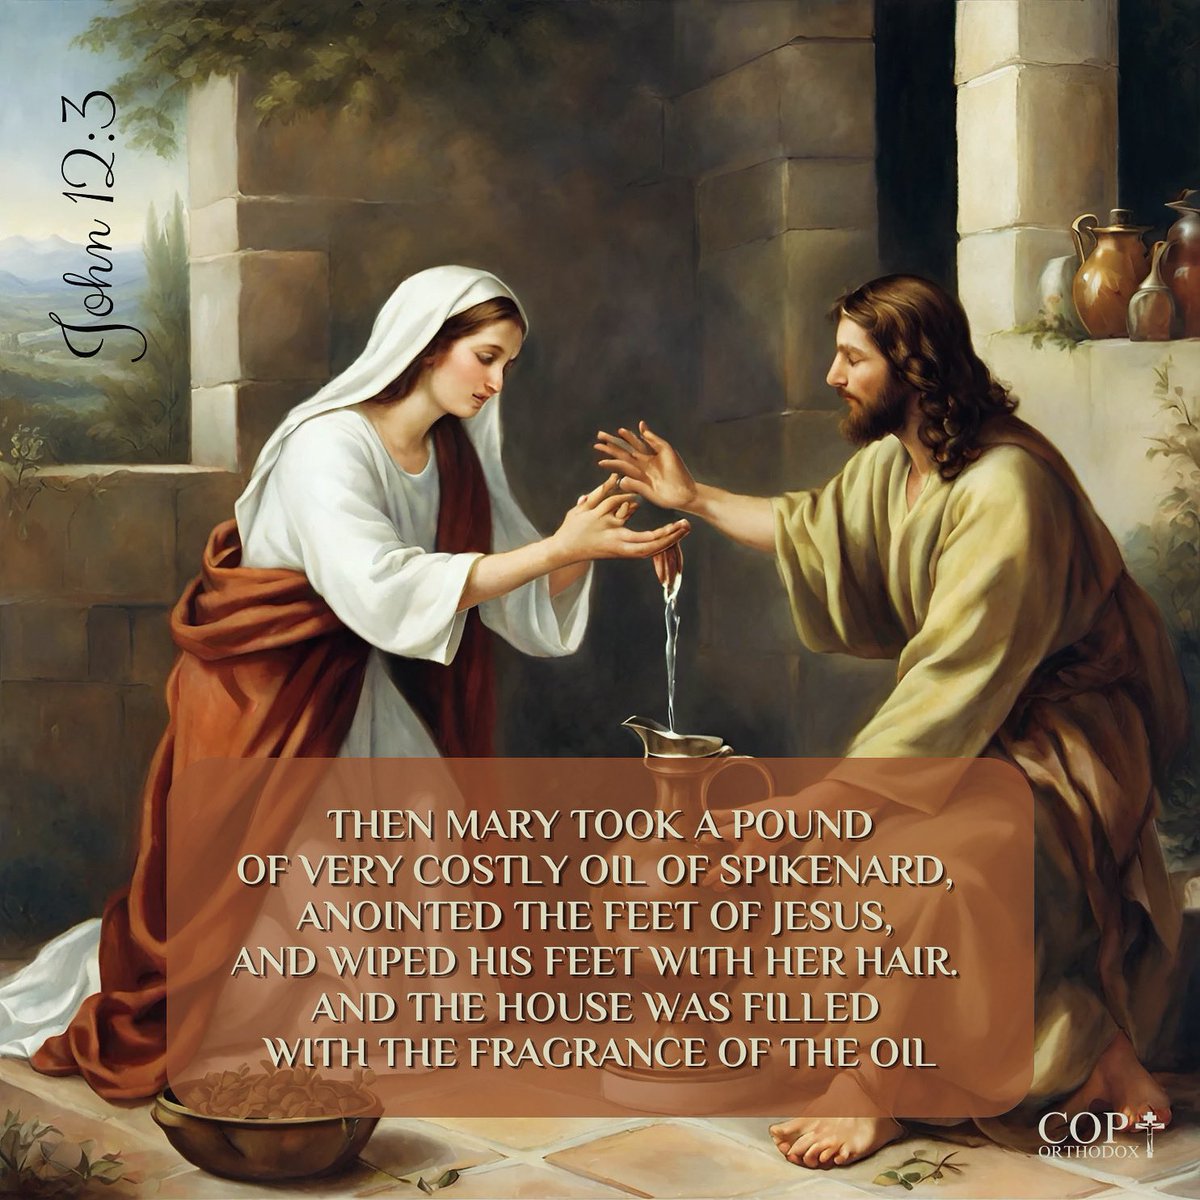 Then Mary took a pound of very costly oil of spikenard, anointed the feet of Jesus, and wiped His feet with her hair. And the house was filled with the fragrance of the oil. John 12:3